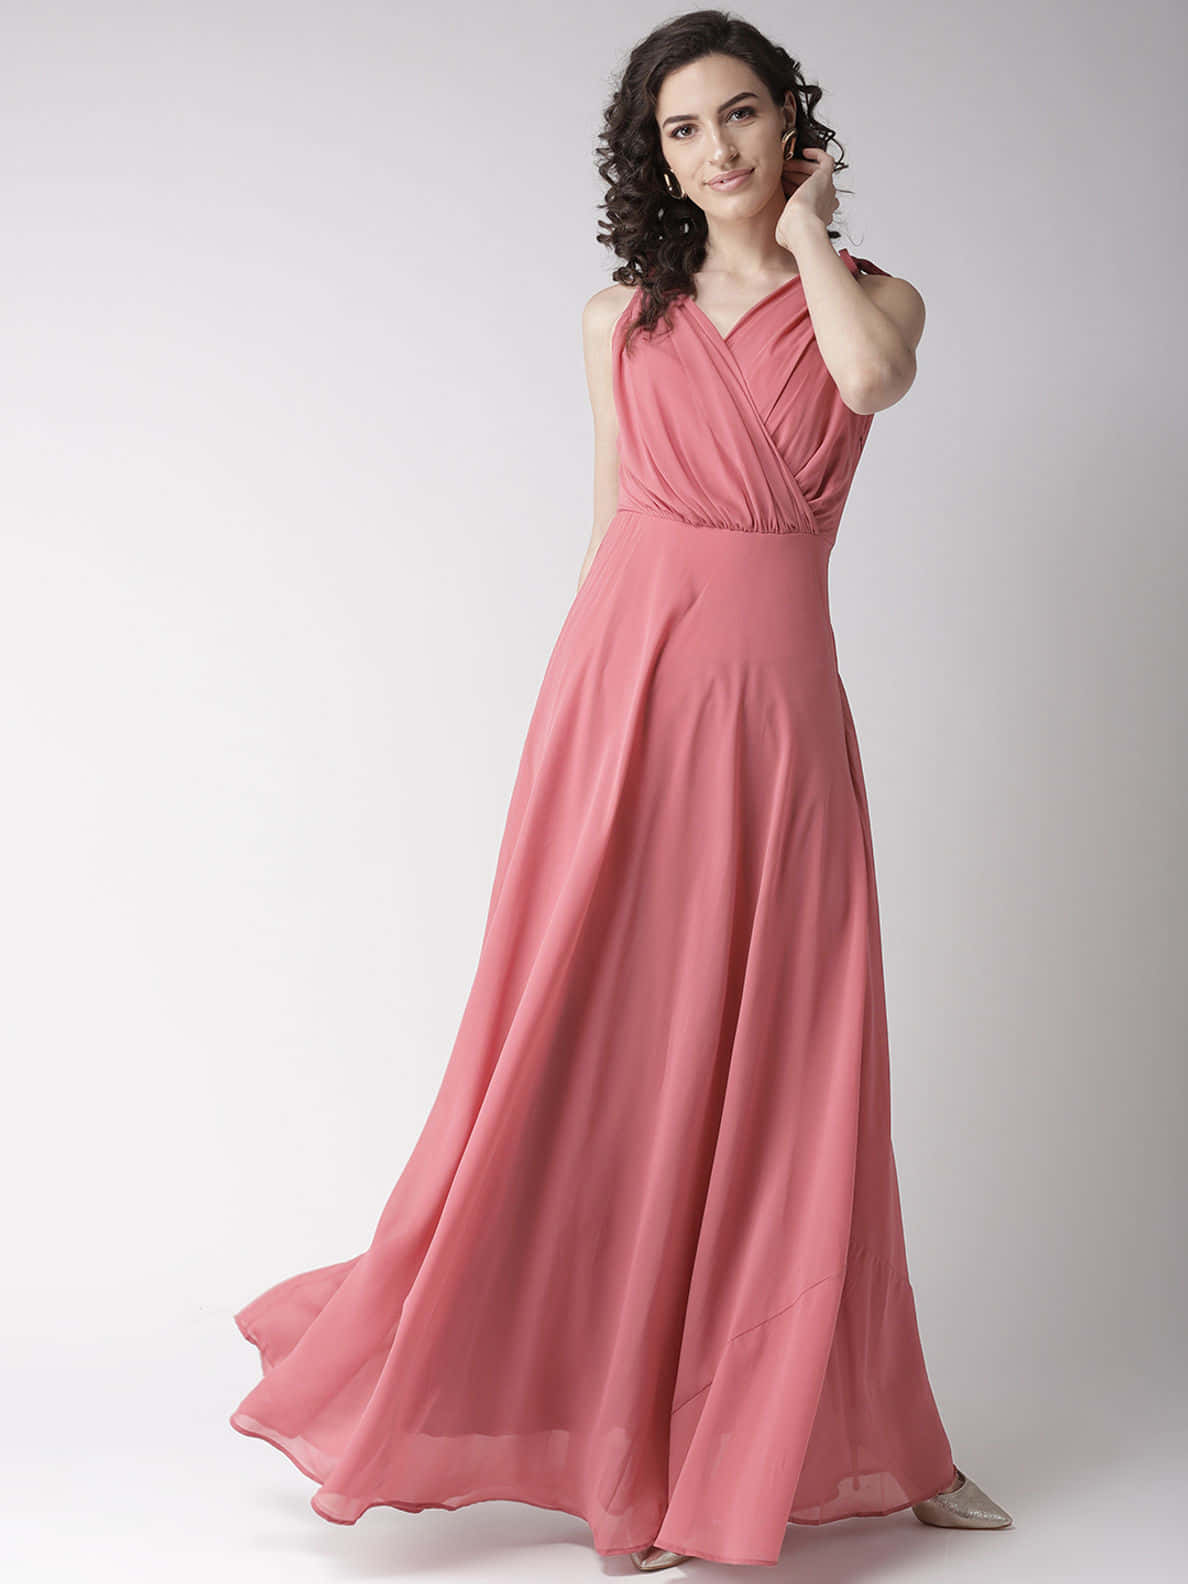 Woman In Peach Infinity Long Dress Picture